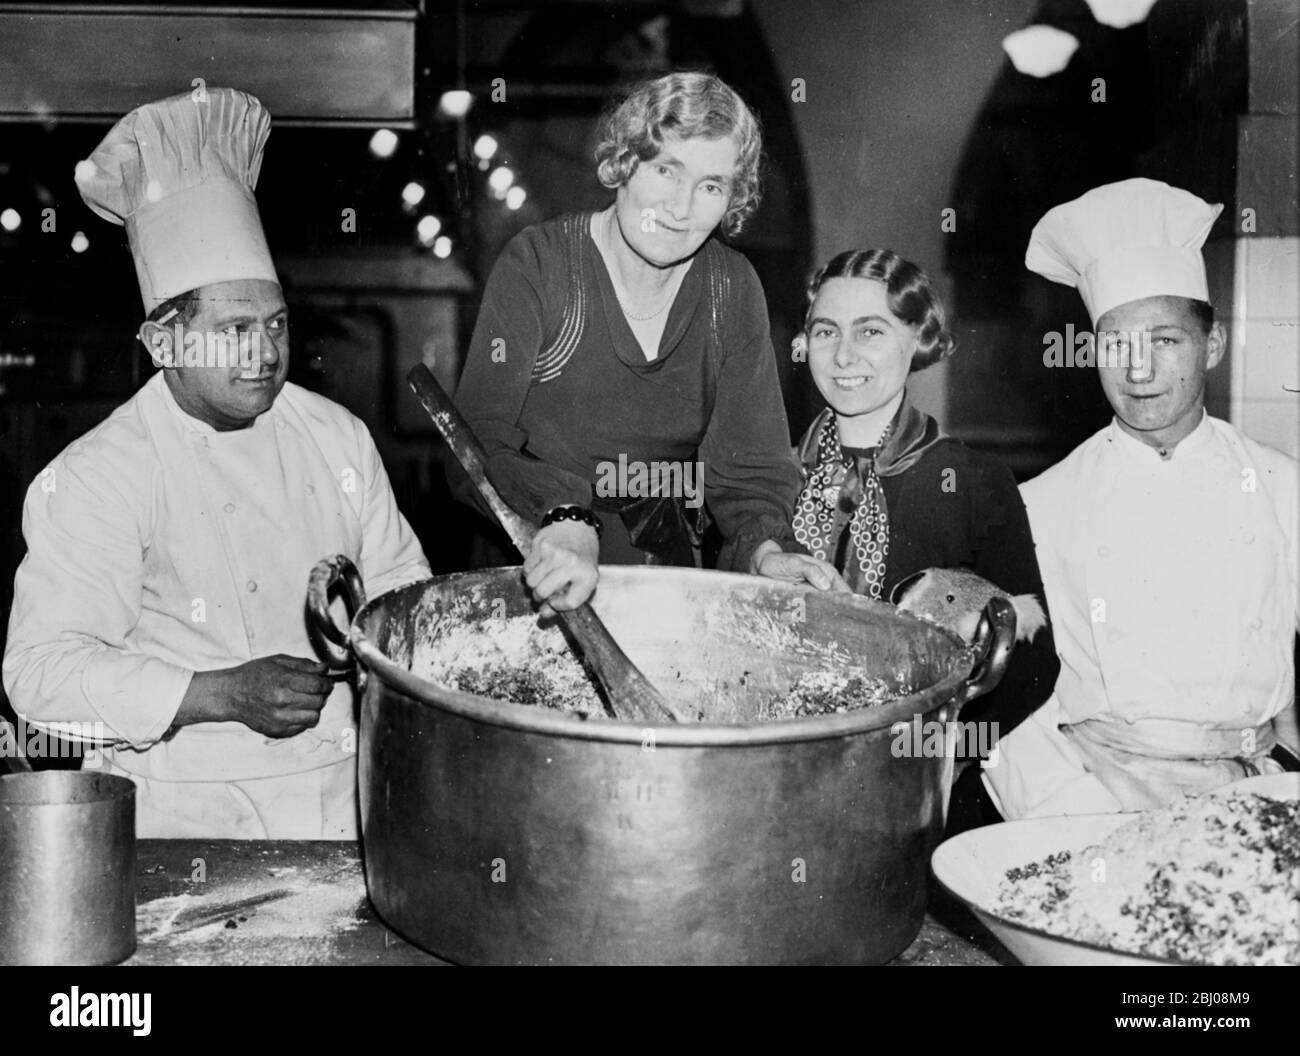 The Lady Mayoress, Lady Vincent assisted by her daughter, Mrs J Stephens and the kitchen chefs, stirring the mixture for the Mansion House Christmas puddings. - 12 December 1935 Stock Photo